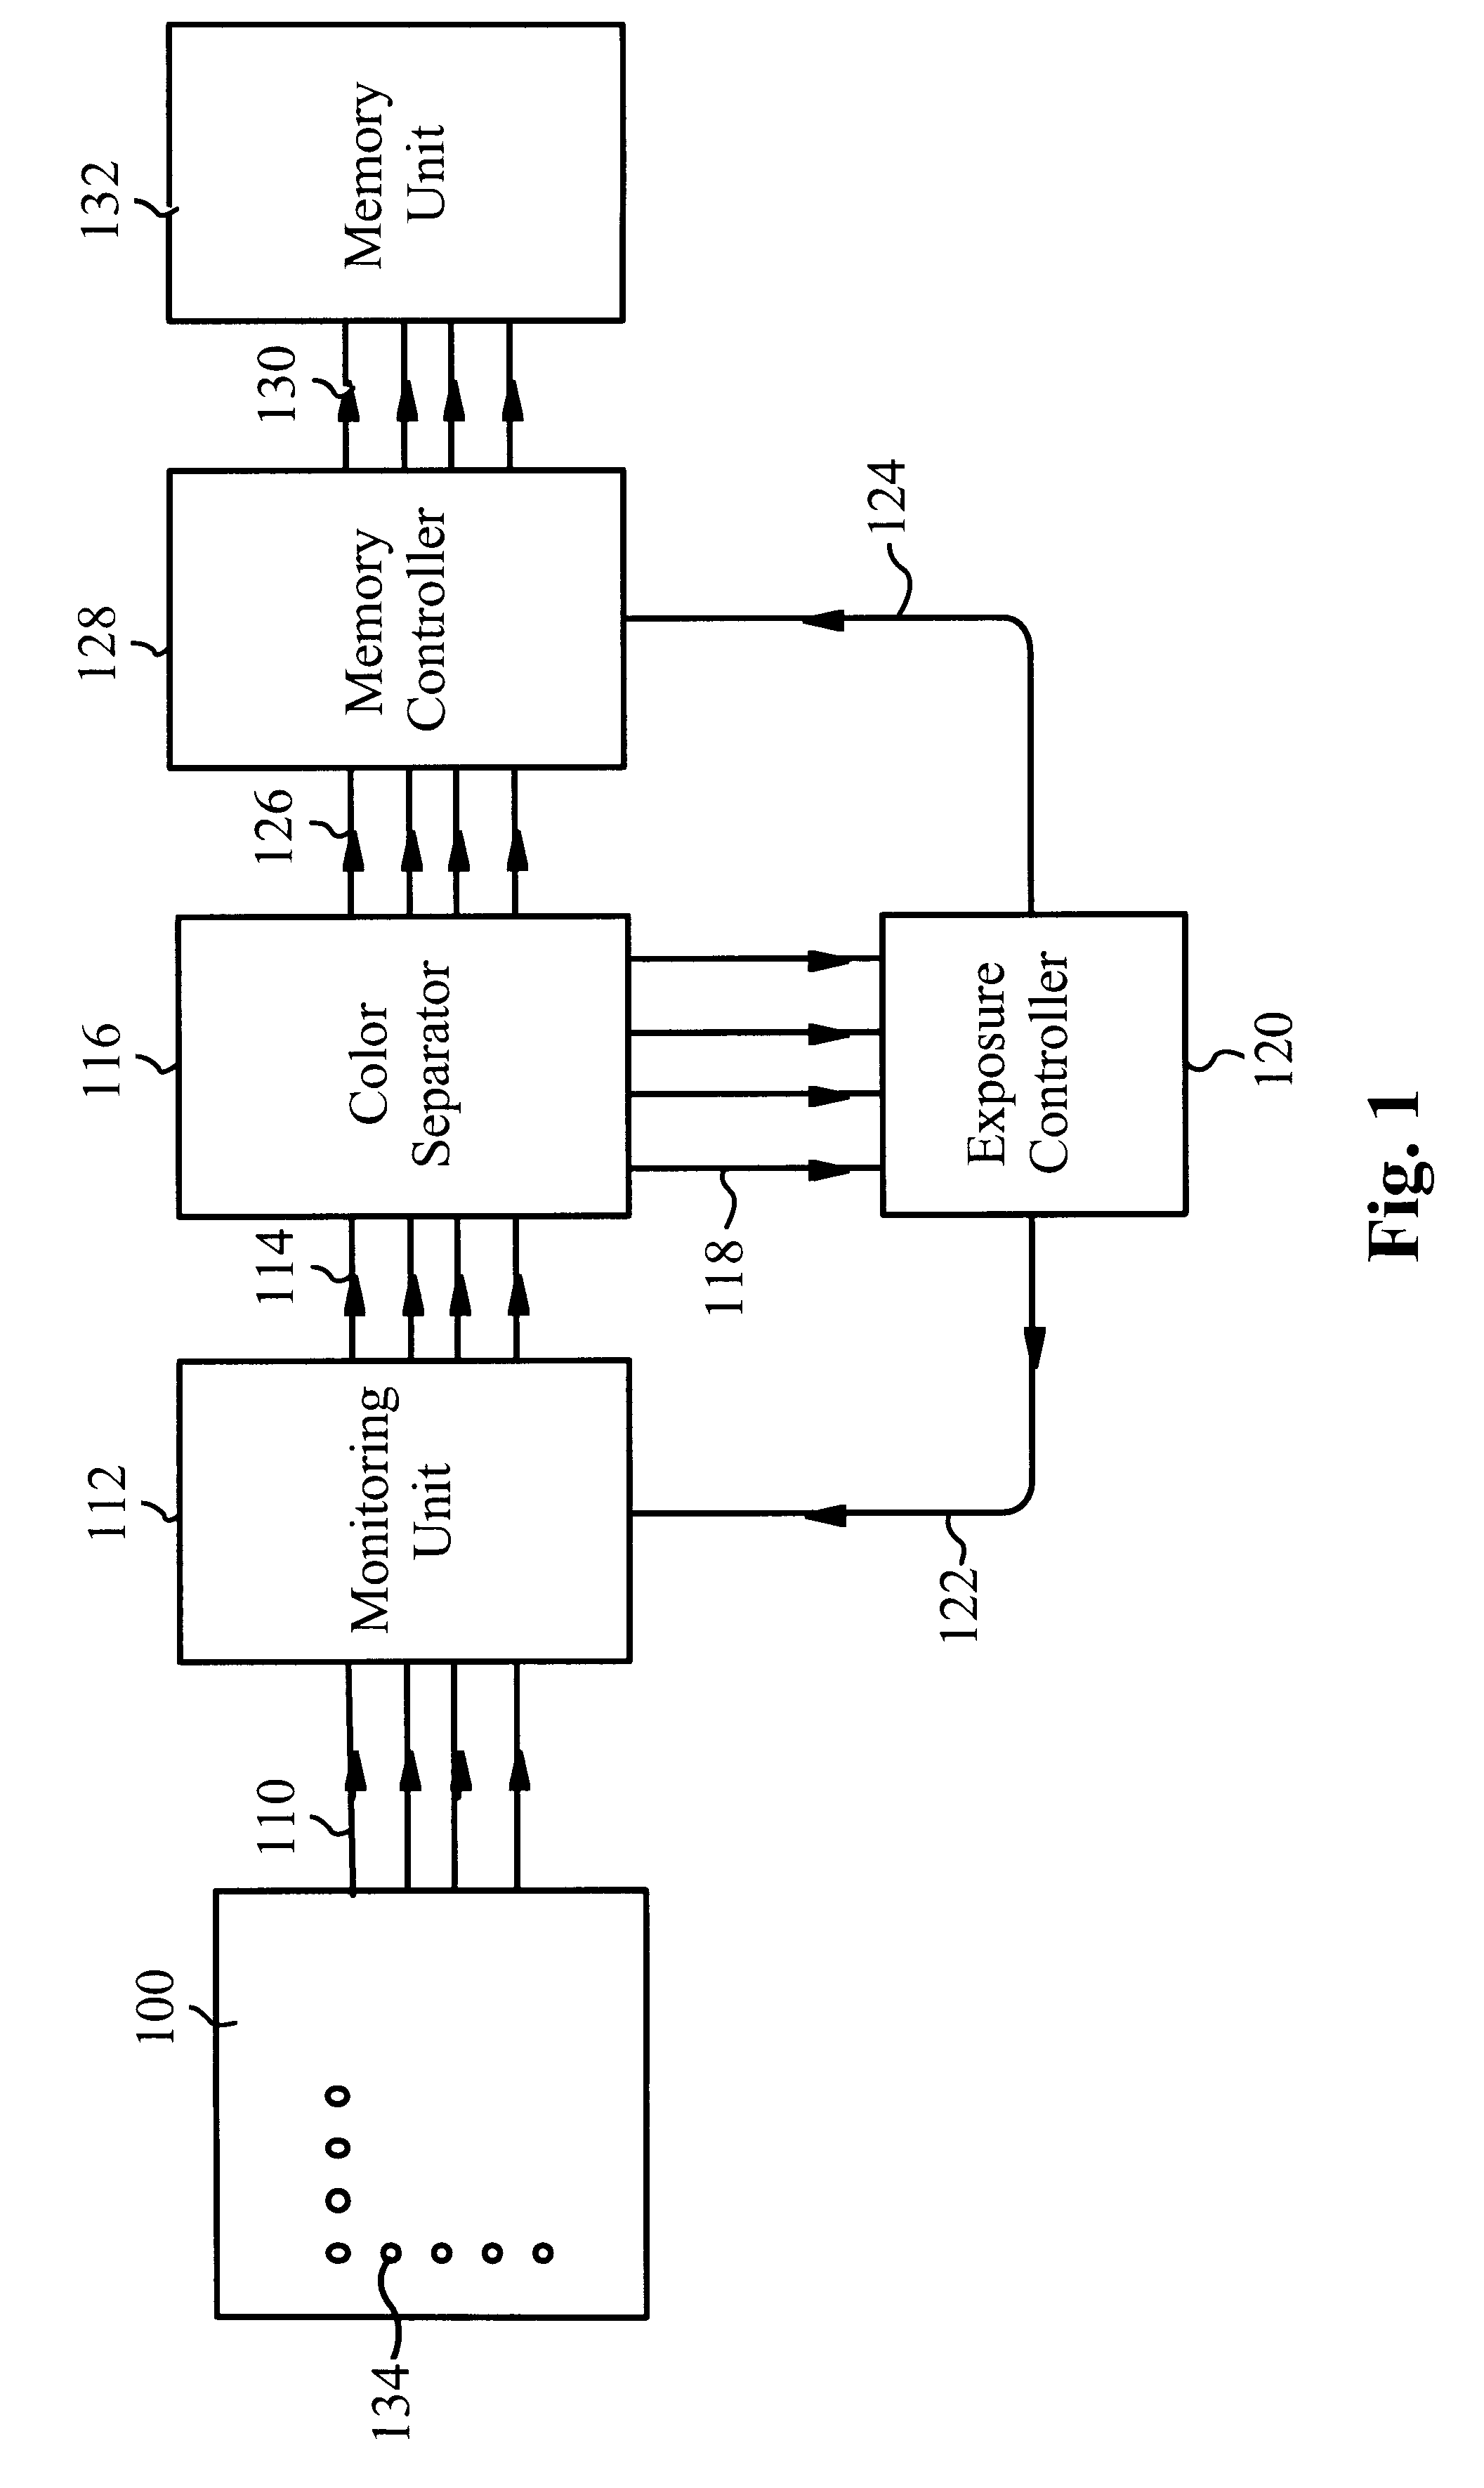 Method and apparatus for optimizing exposure time in image acquisitions